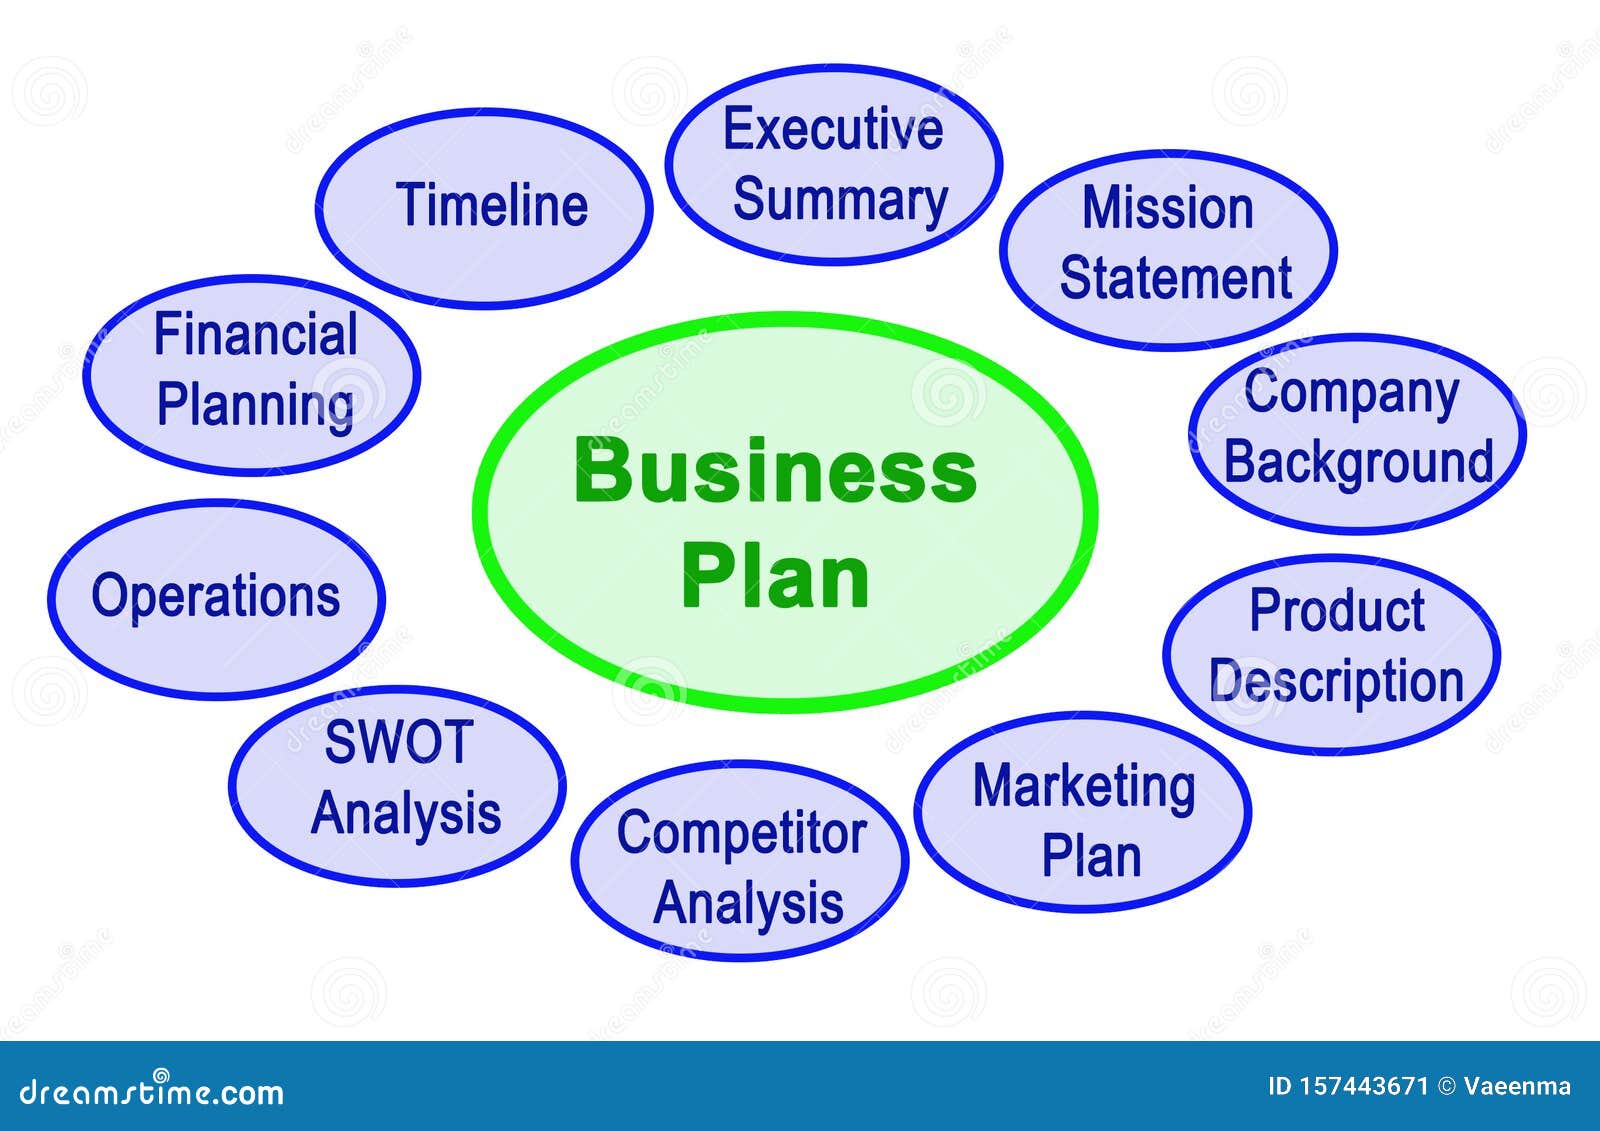 components of a business plan in business studies